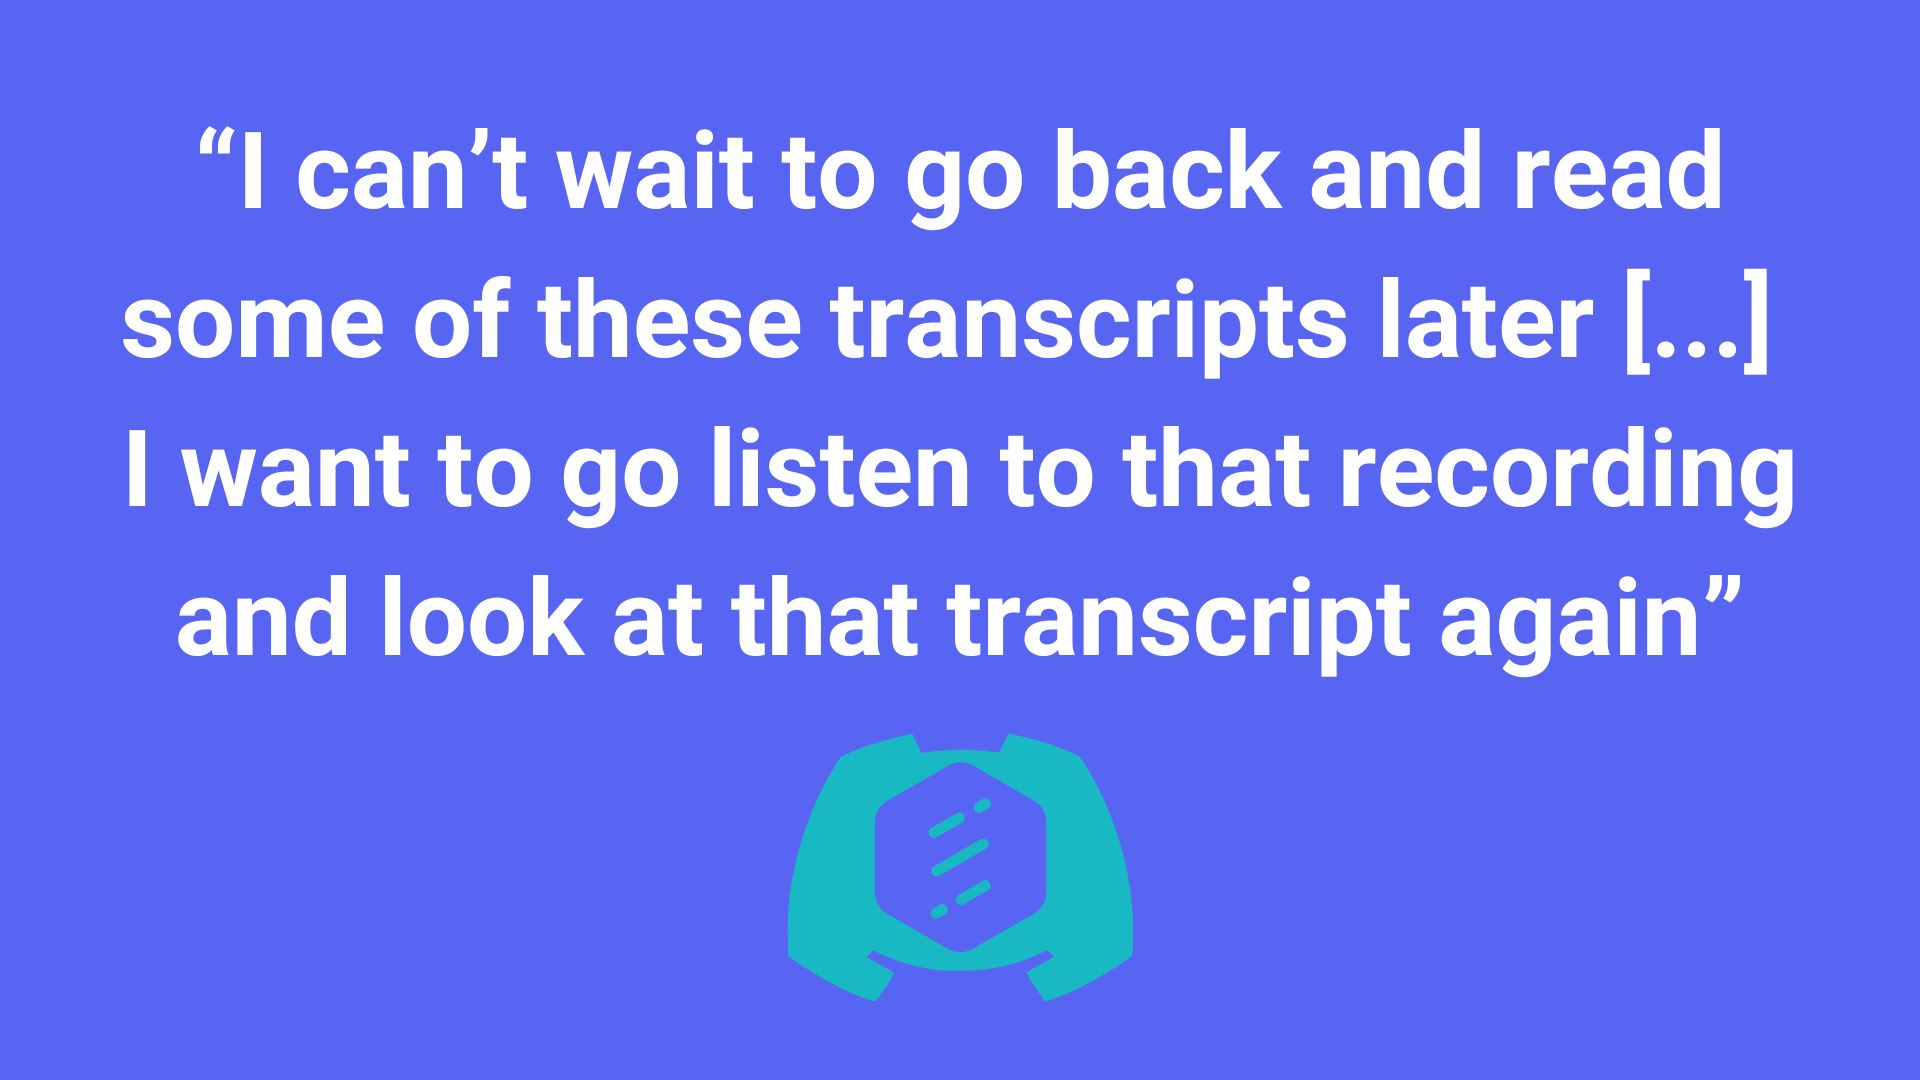 A SeaVoice Discord bot user expresses excitement about the persisted audio and transcription files.